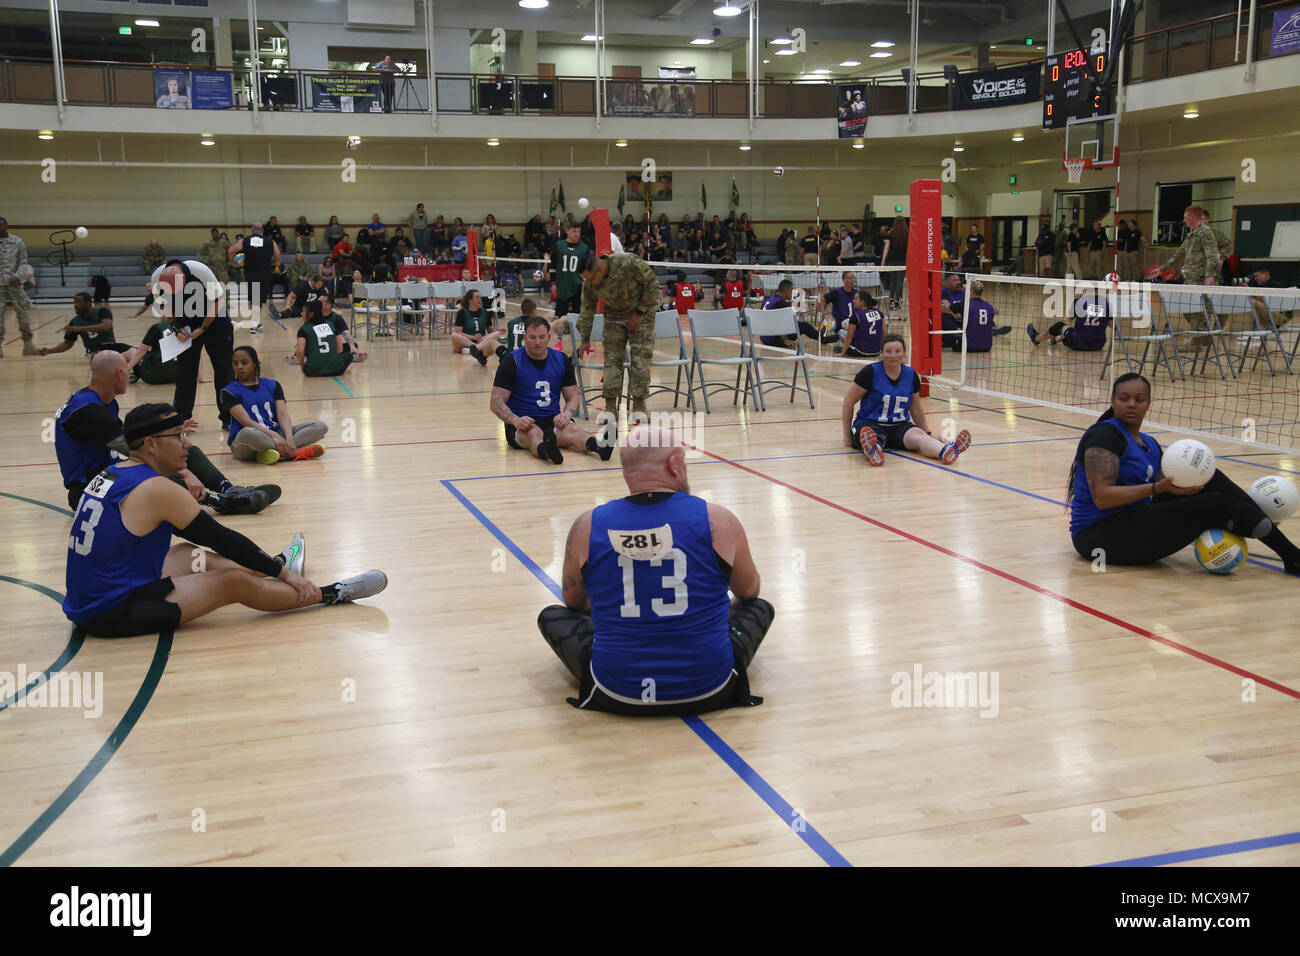 Athletes participating in the 2018 Army Trials engage in practice drills before the start of a volleyball competition at Fort Bliss, Texas, March 3, 2018. 74 wounded, ill, or injured active duty Soldiers and veterans participate in a series of events that are held at Fort Bliss, Texas, Feb. 27 through March 9, 2018, as Deputy Chief of Staff, Warrior Care and Transition hosts the 2018 U.S. Army Trials. (U.S. Army photo by Pfc. Tescia Mims) Stock Photo